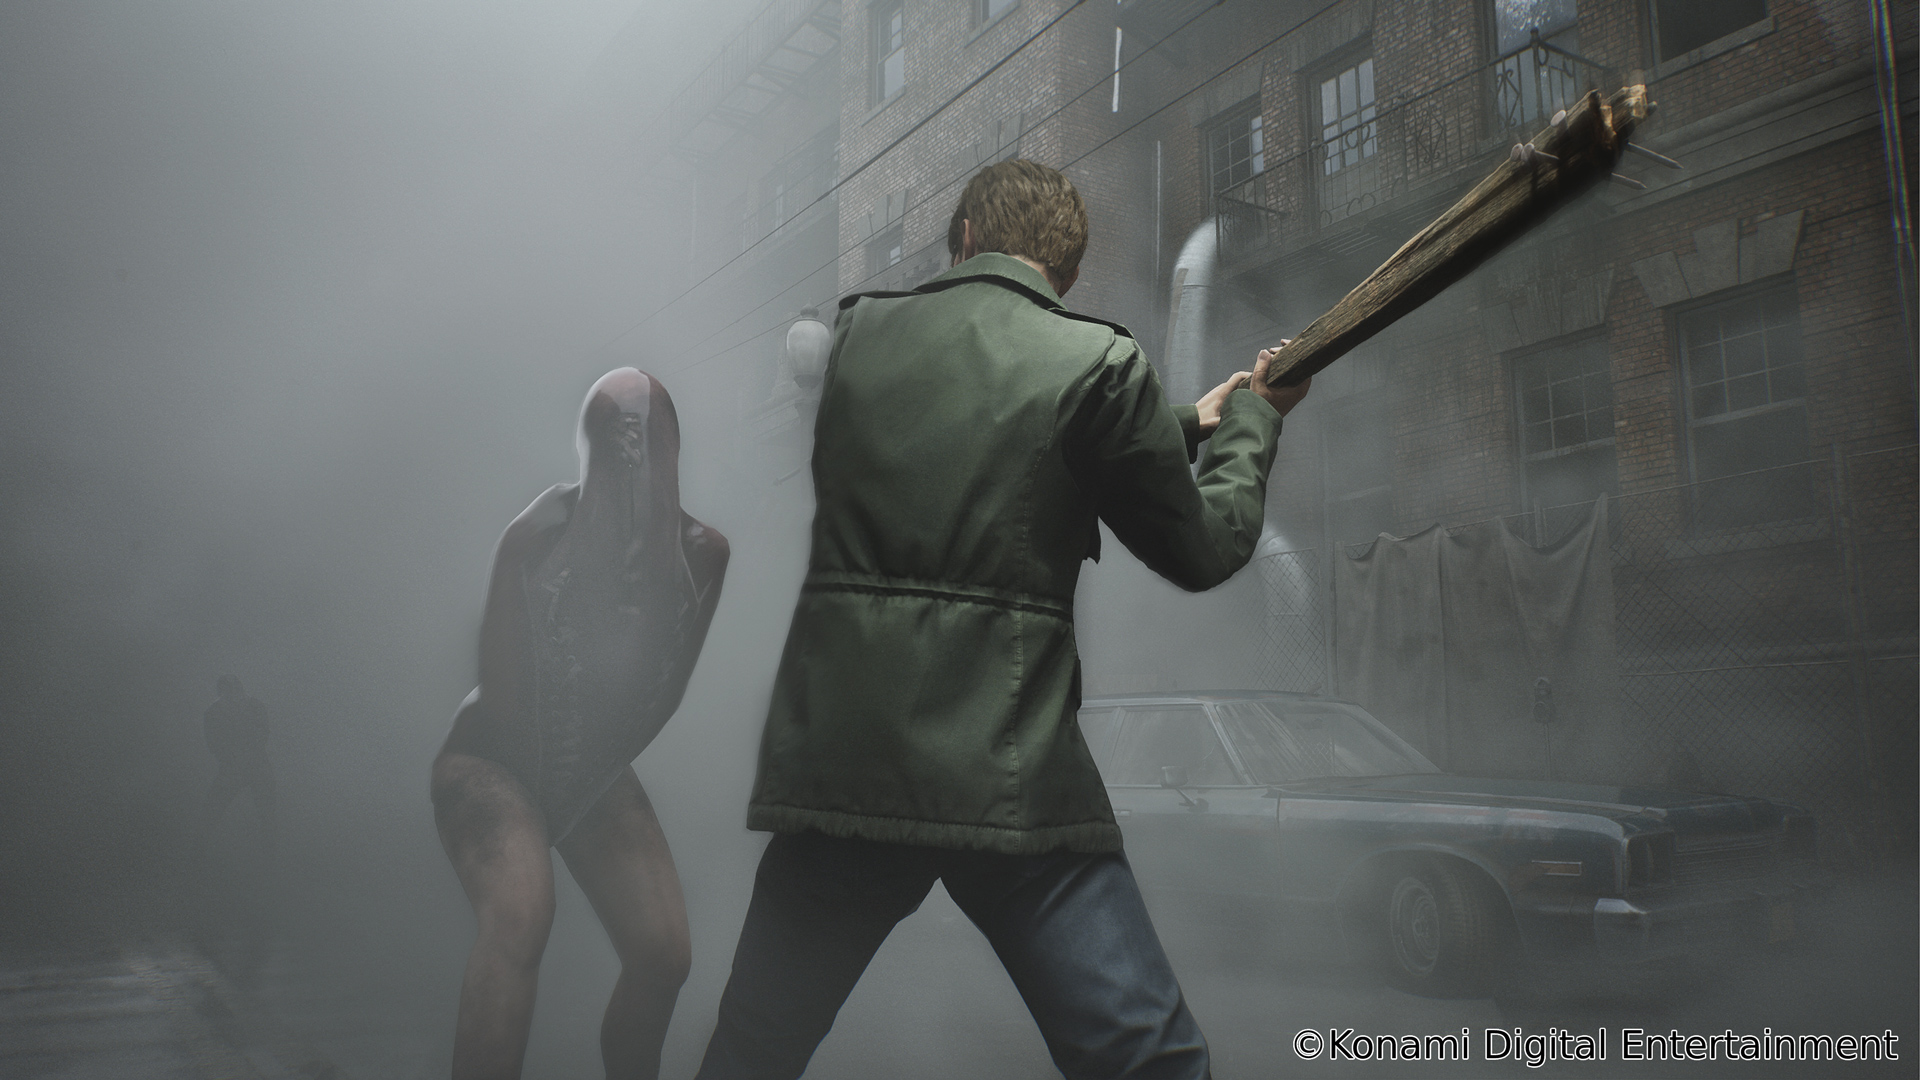 Silent Hill's return shows Konami is taking games seriously again